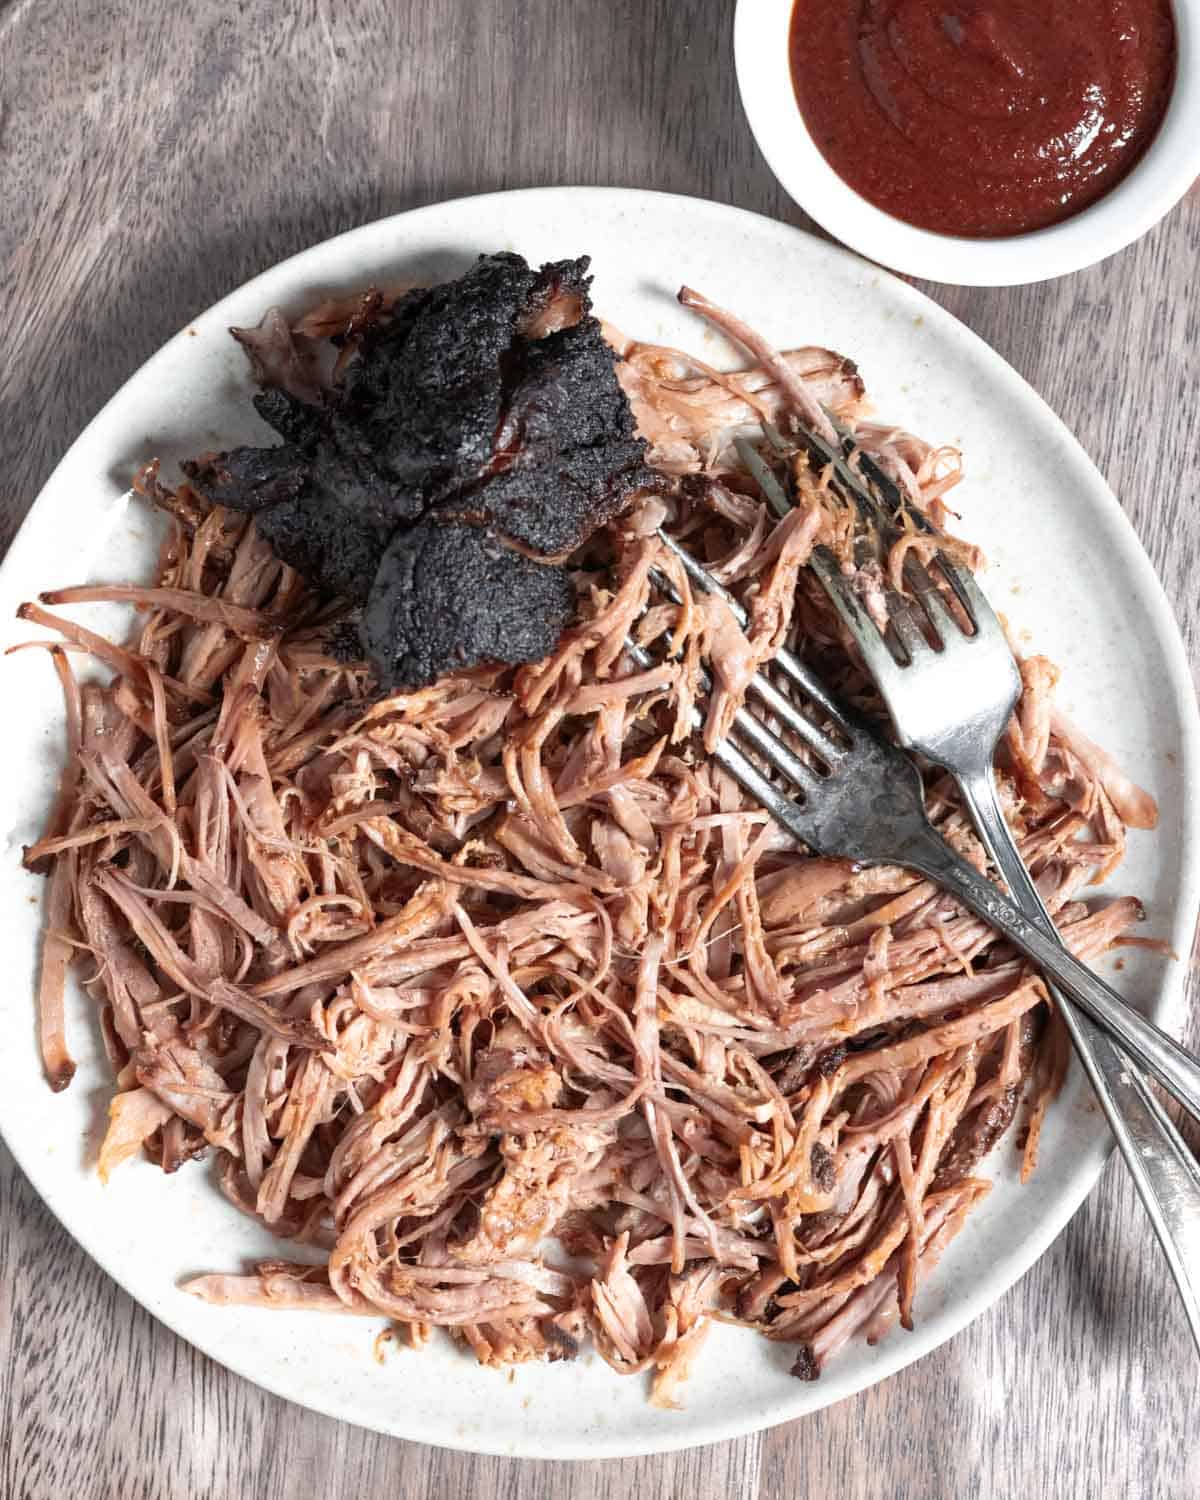 White plate full of shredded pork with a barky chunk, two forks, and a ramekin of sauce.